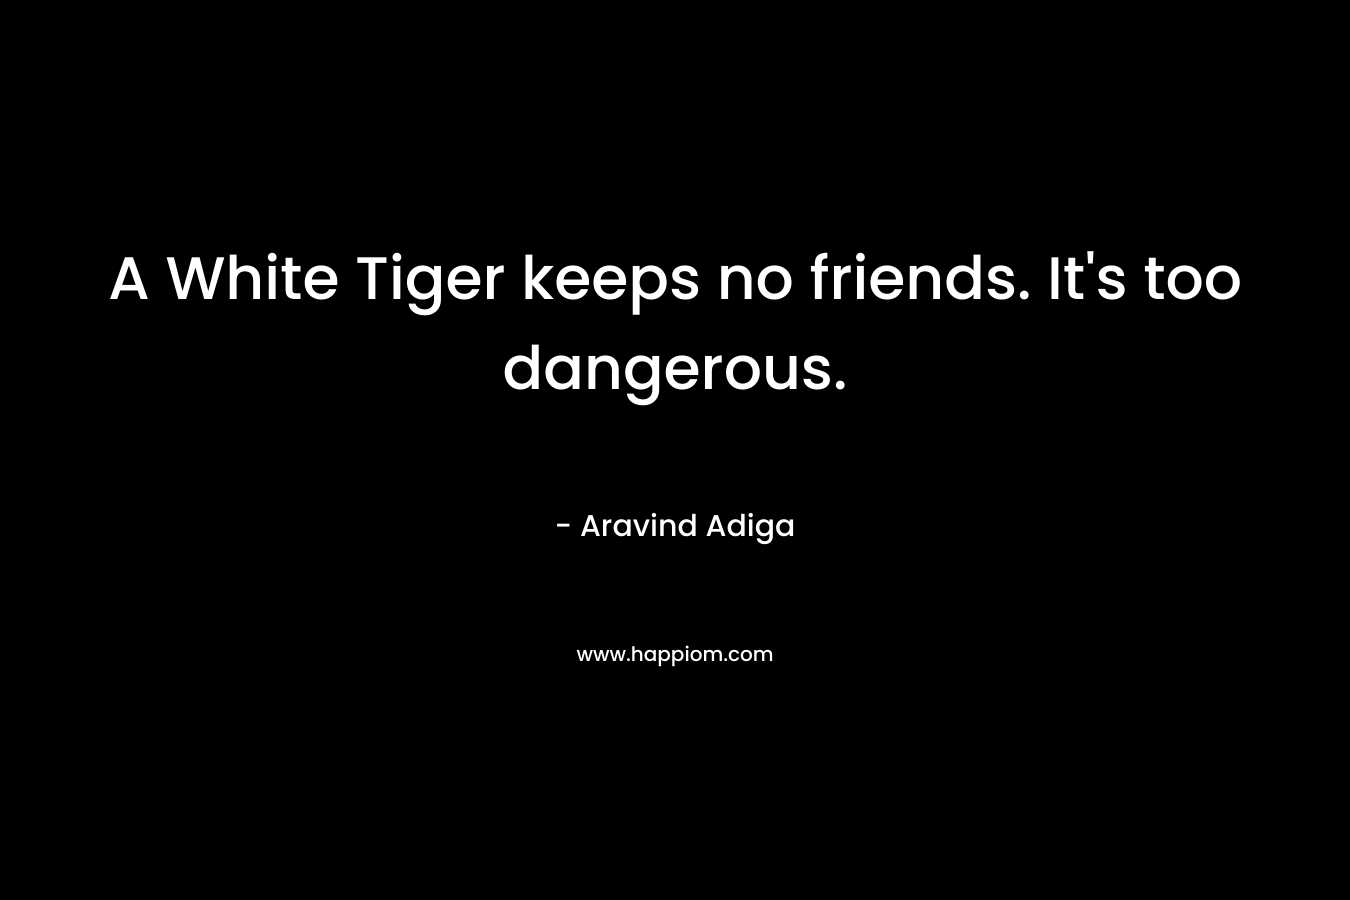 A White Tiger keeps no friends. It's too dangerous.